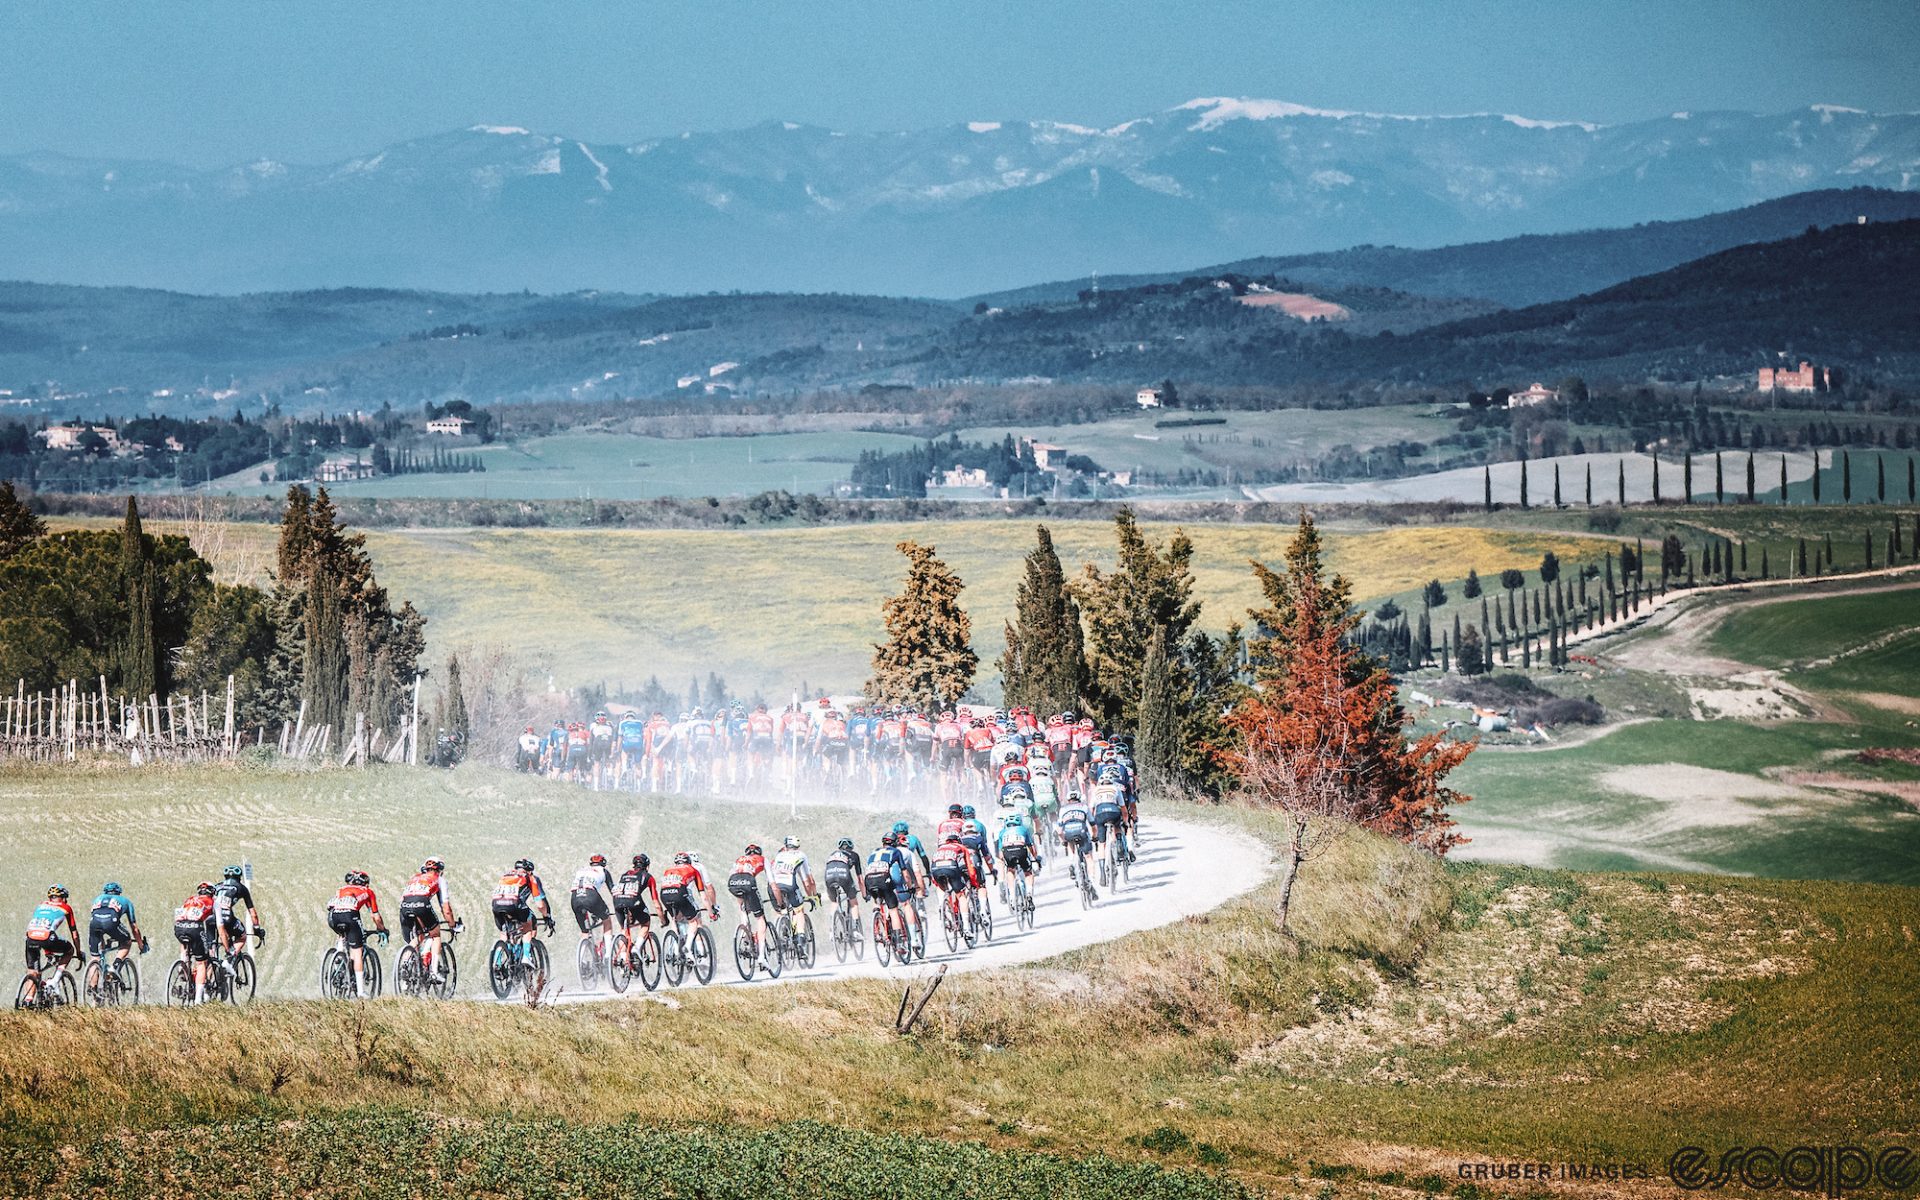 The women's peloton races at the 2023 Strade Bianche.